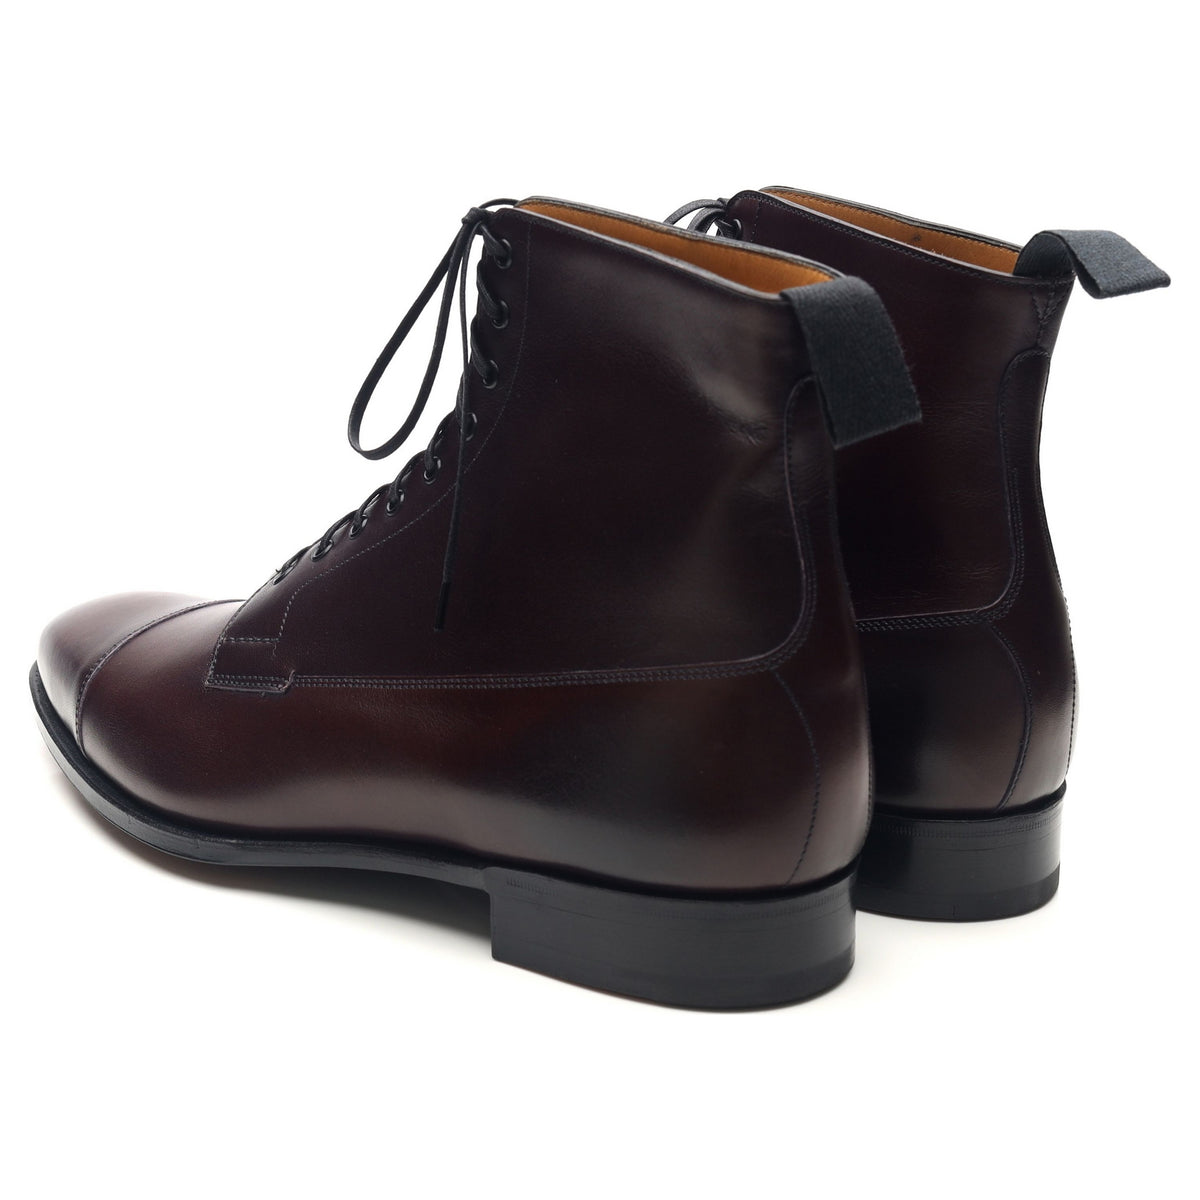 &#39;Albion&#39; Burgundy Leather Boots UK 8 E